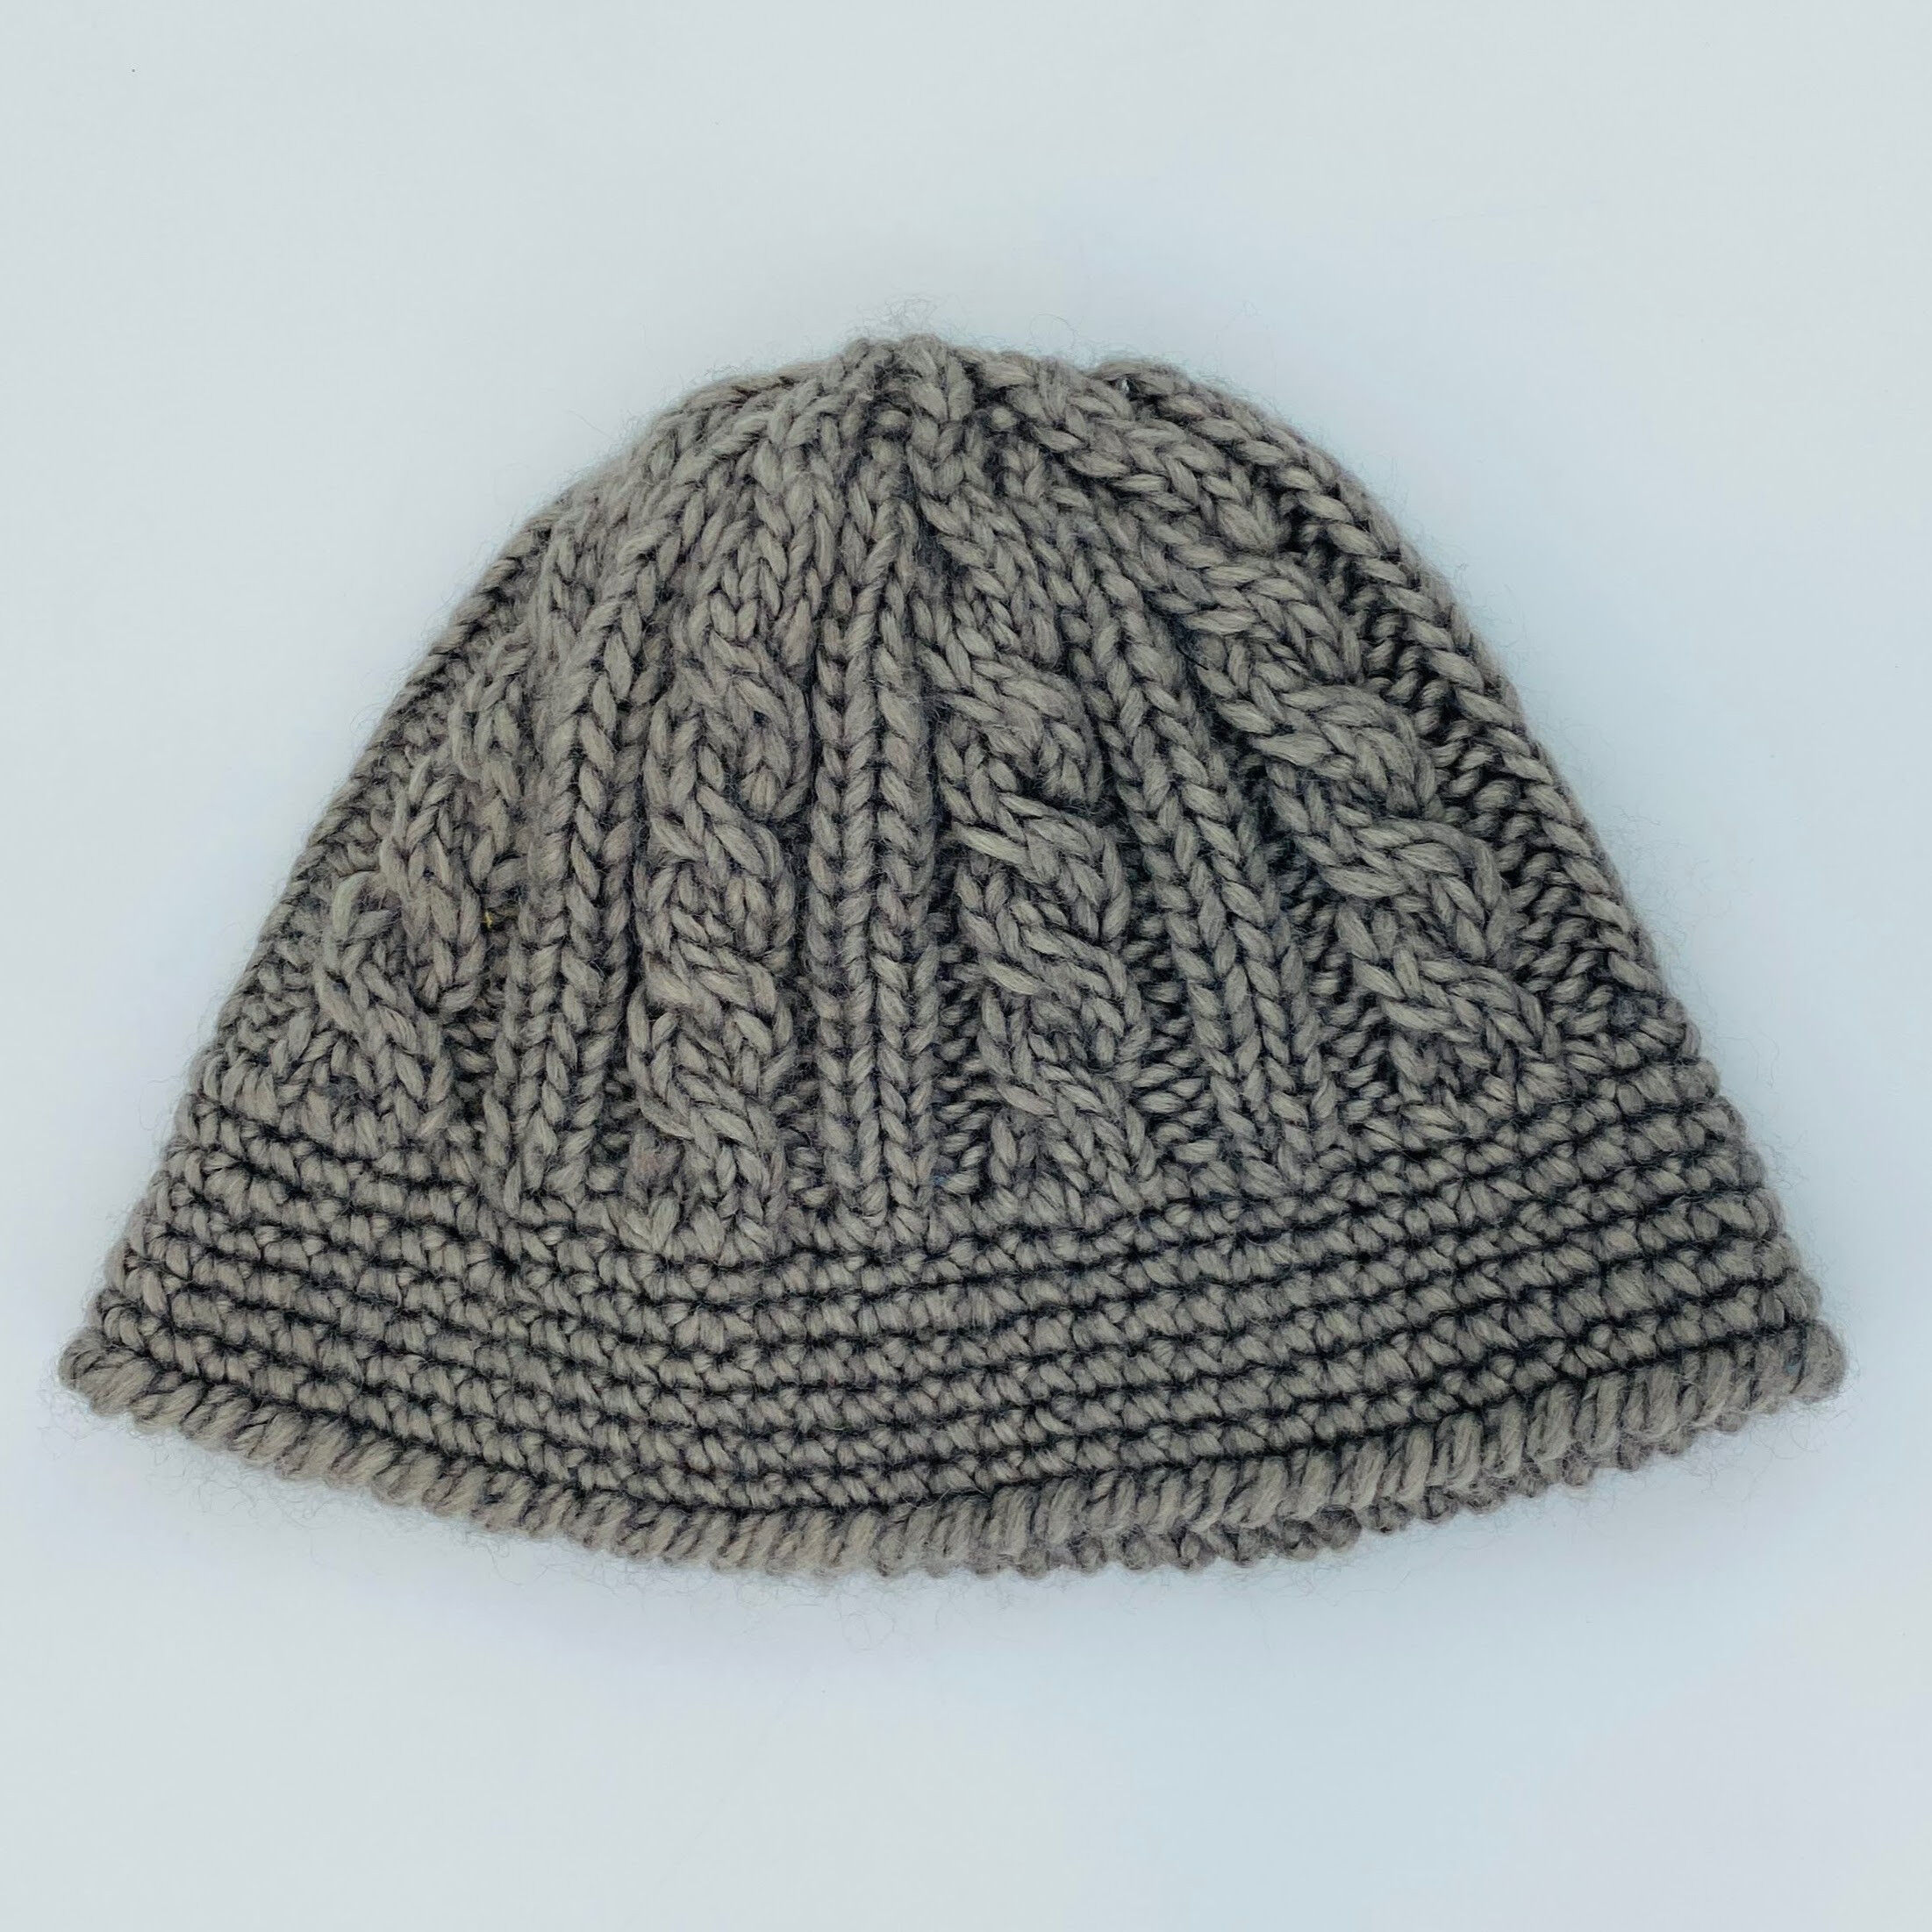 Patagonia Beanie Hat - Second Hand Beanie - Grey - One Size | Hardloop